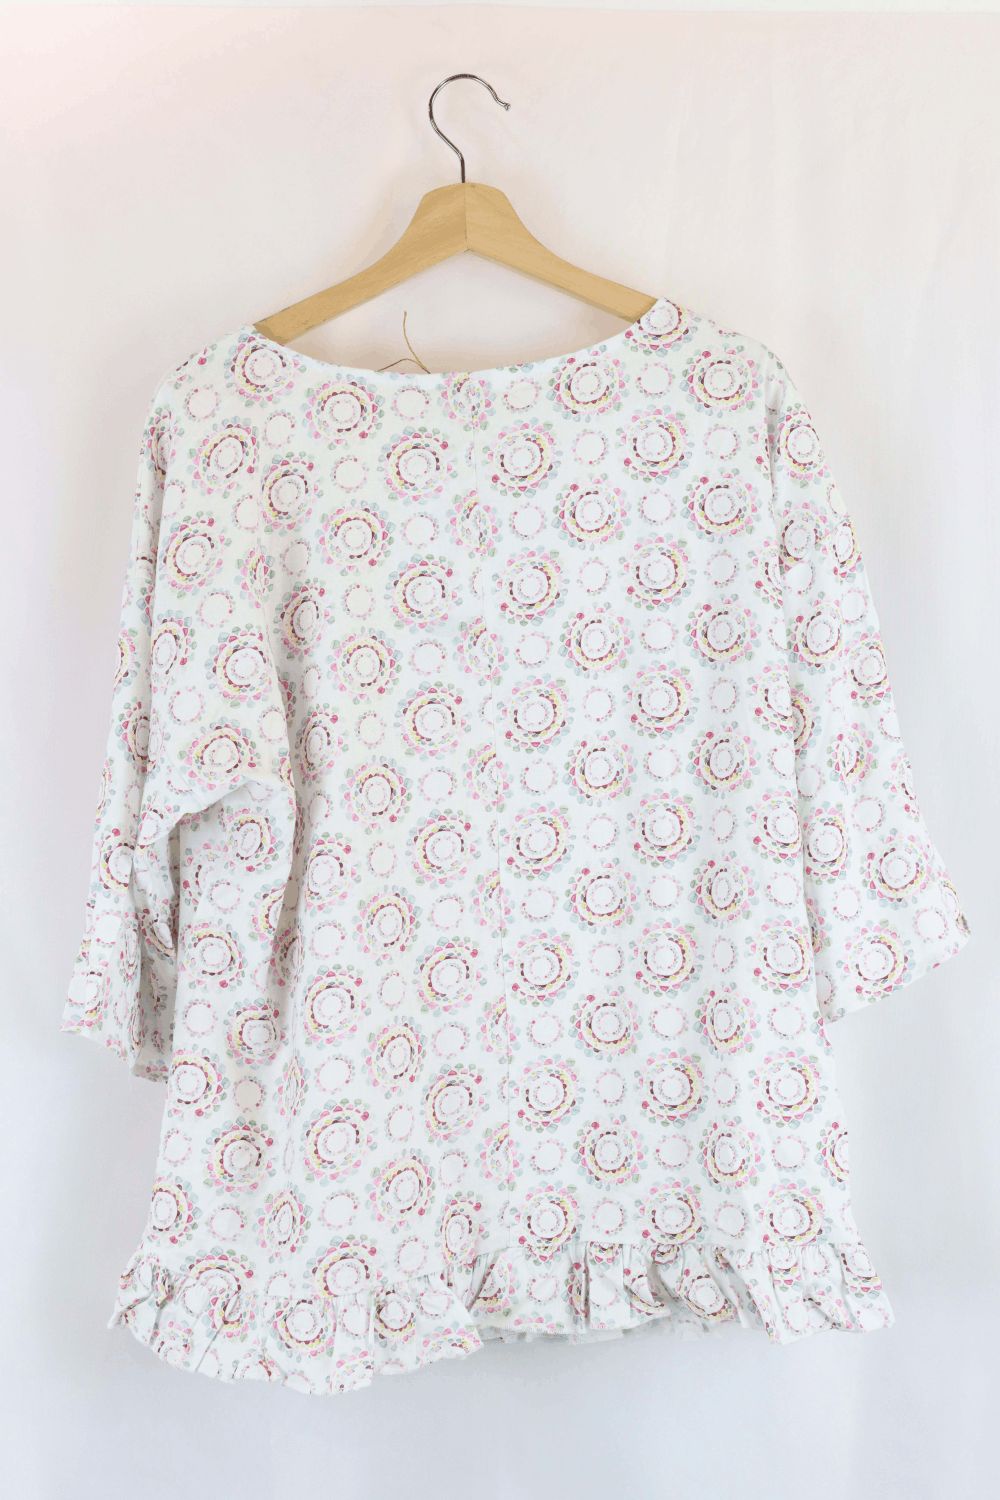 Capture Pink And White Floral Top 14